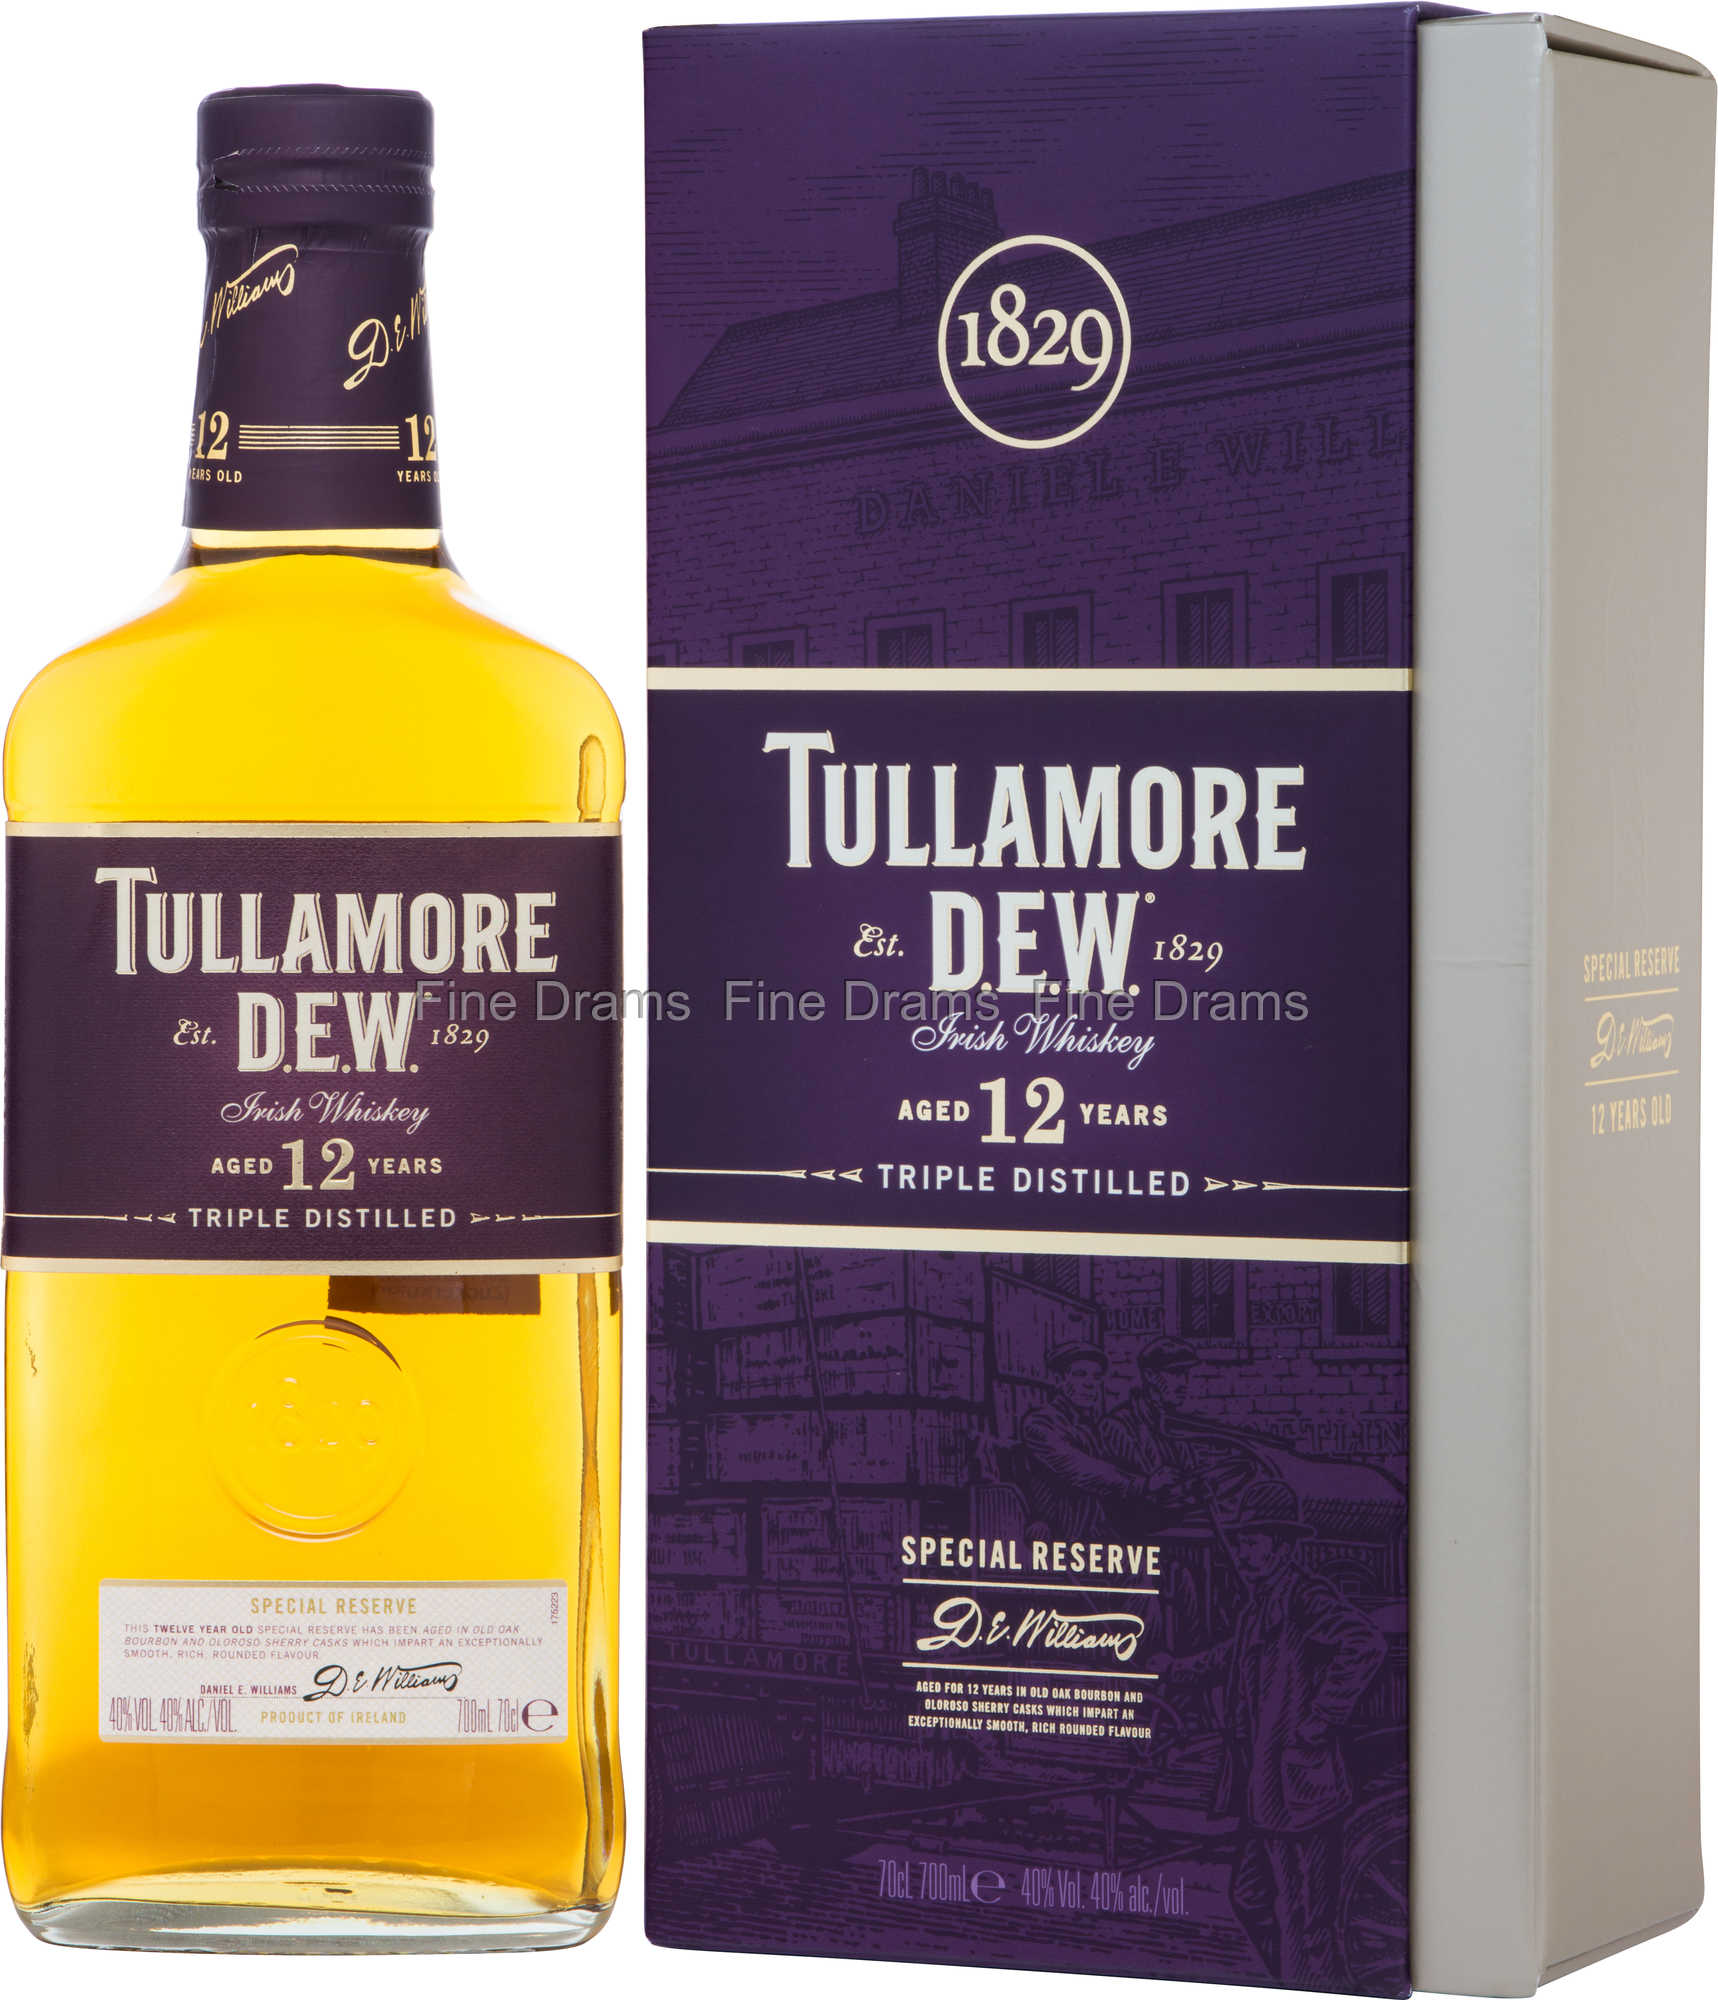 D.E.W. Year 12 Whisky Old Tullamore